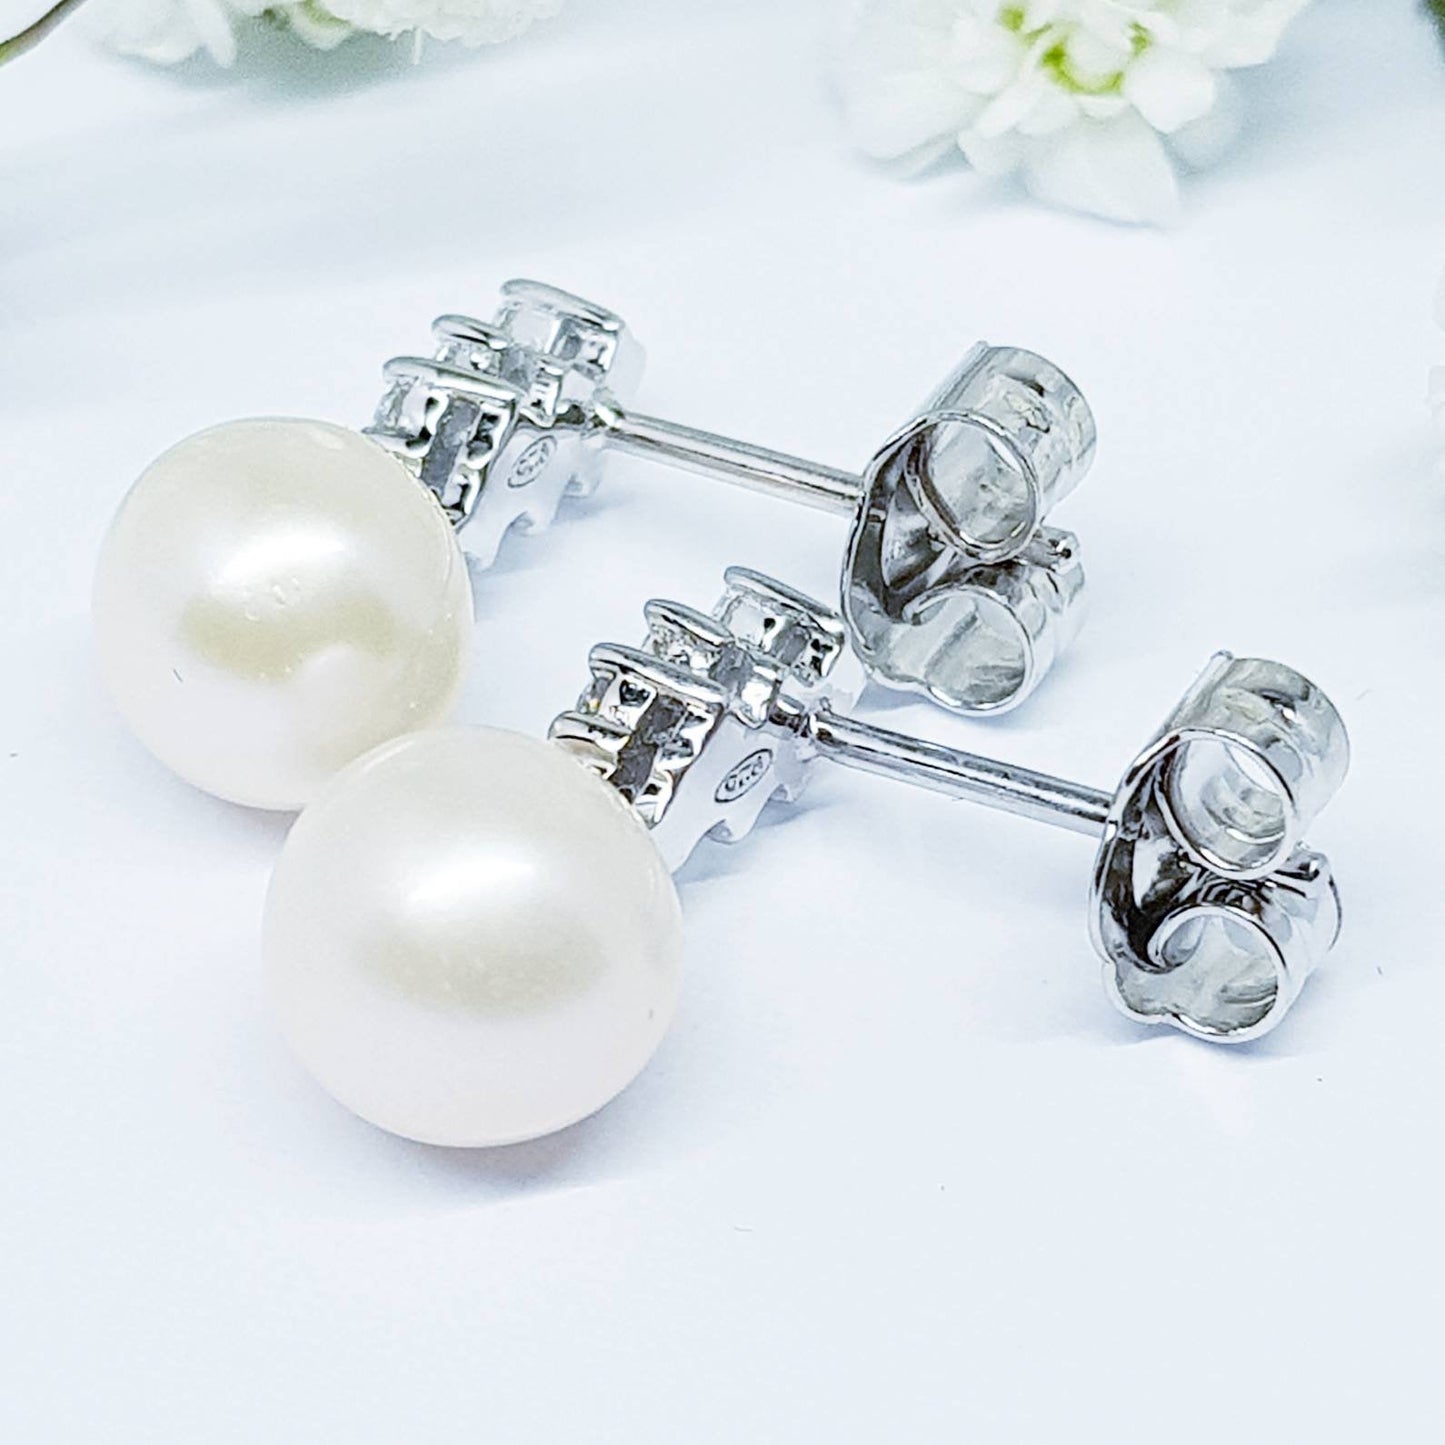 Cultured Pearl Earrings, Natural Pearls, White Pearl Earrings, June Birthstone, June Earrings, Bridal Pearl Earrings, Silver Pearl Earrings